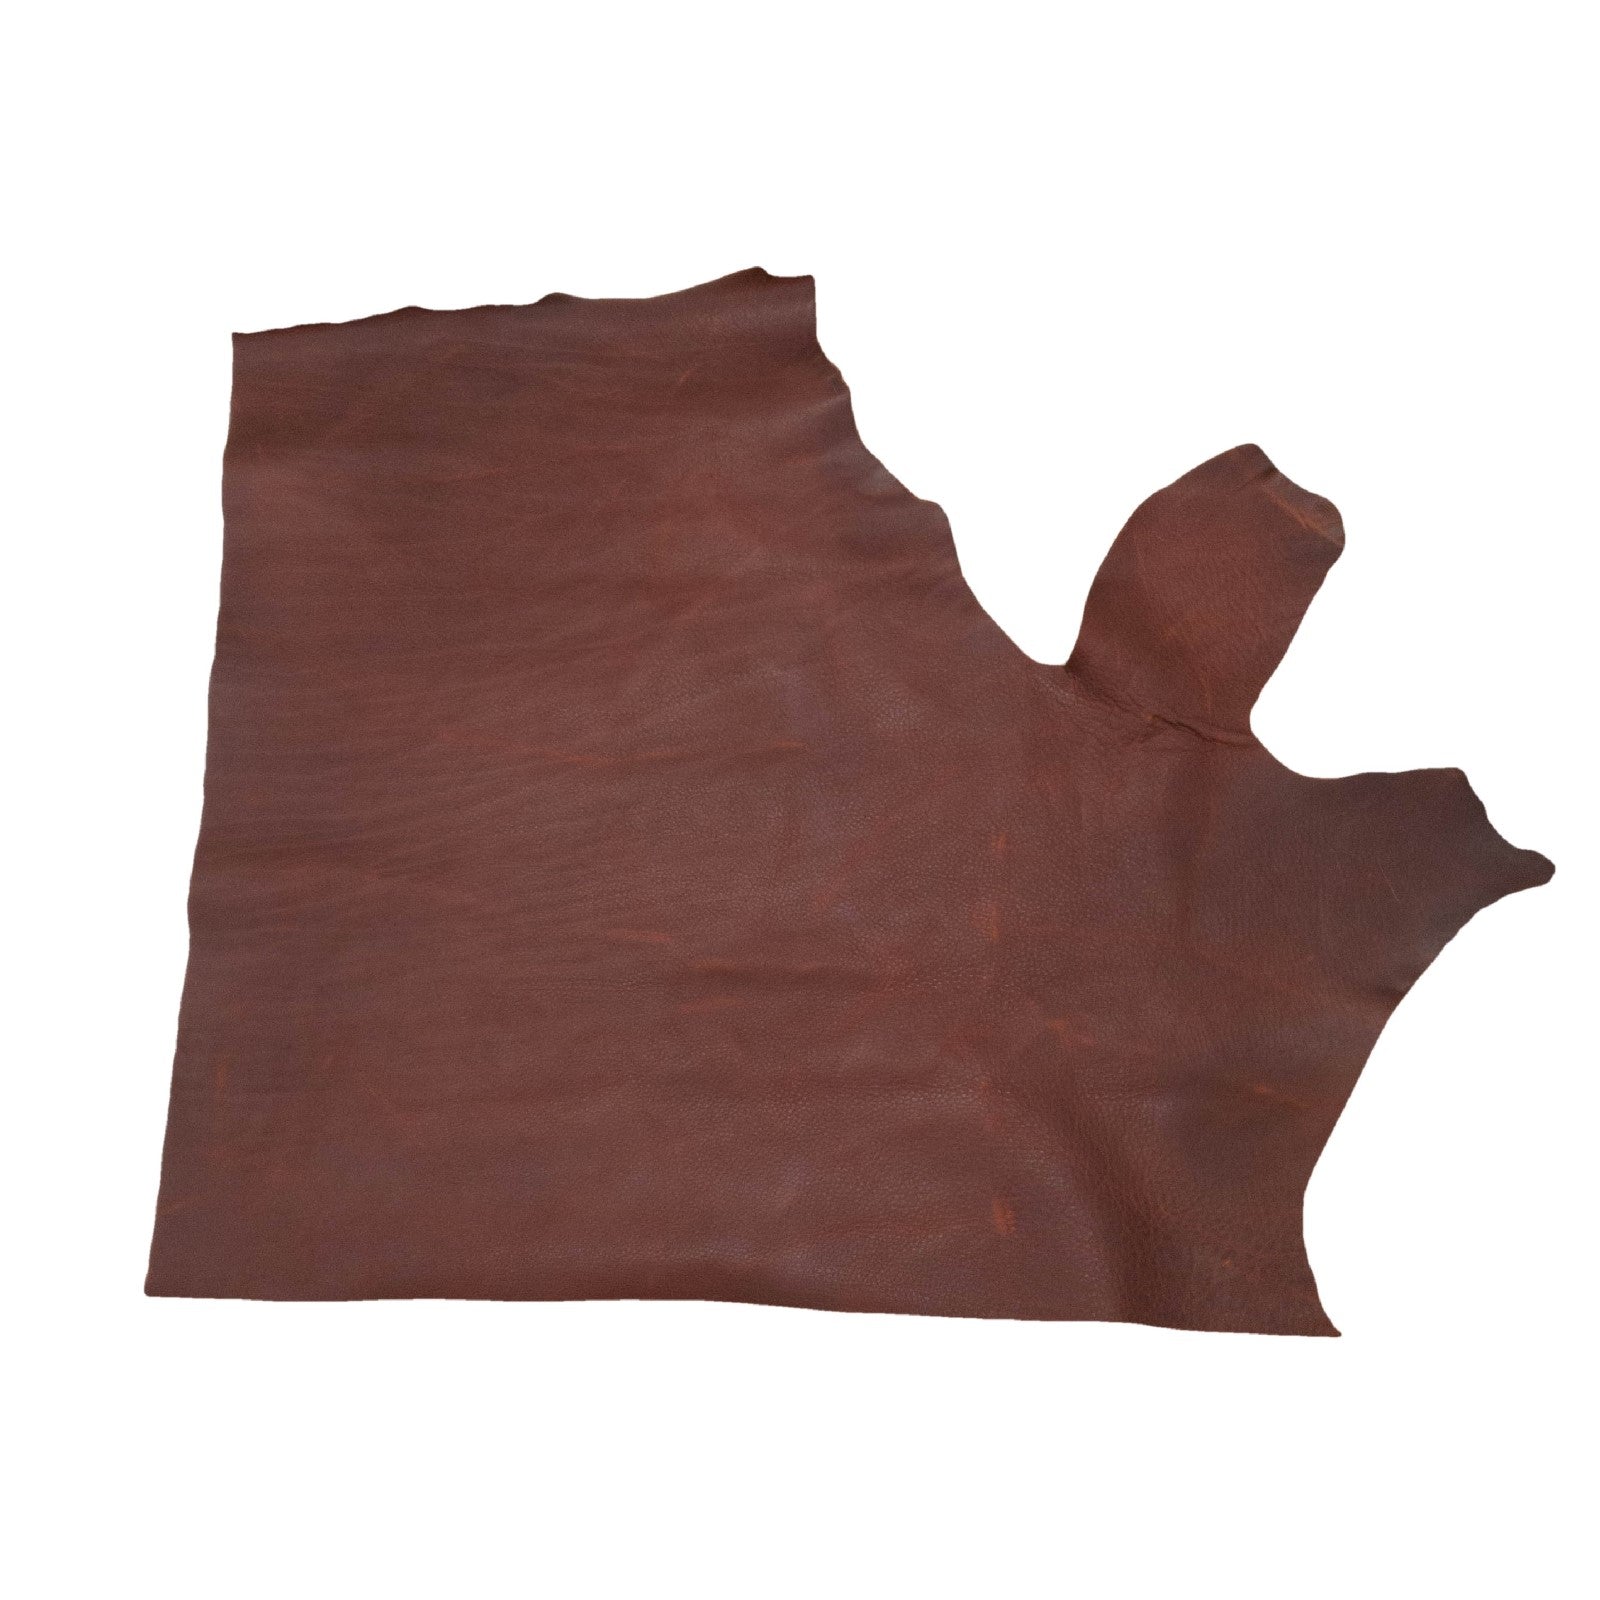 Mountain Man Maroon, Chap Cow Sides, Highland Ridge, 6.5-7.5 / Top Piece | The Leather Guy